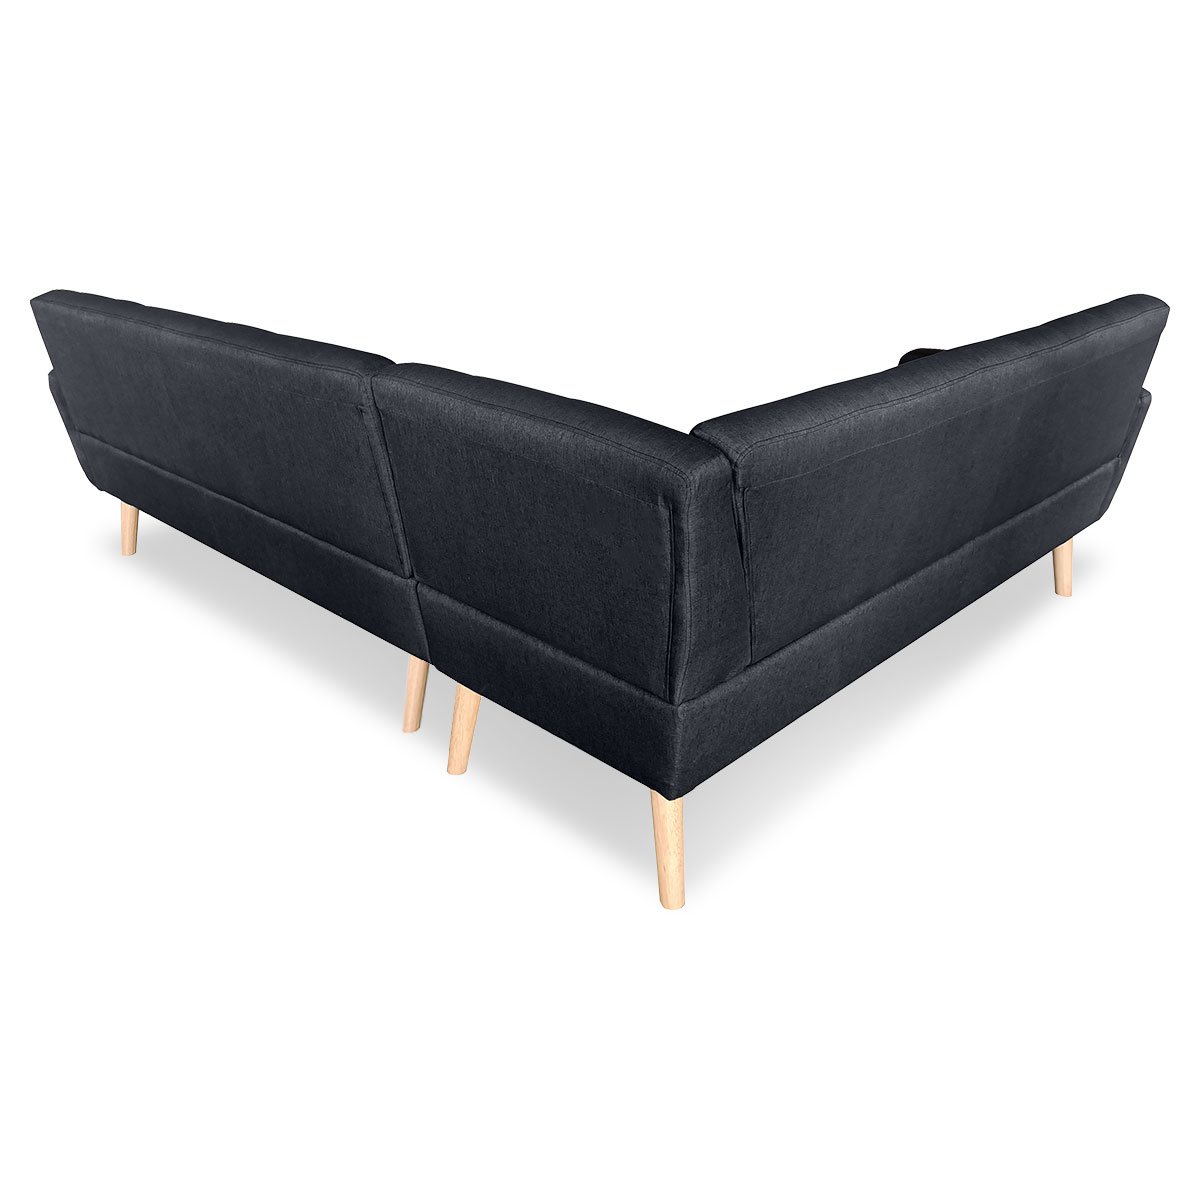 indoor furniture Linen Corner Wooden Sofa Lounge L-shaped with Chaise Black